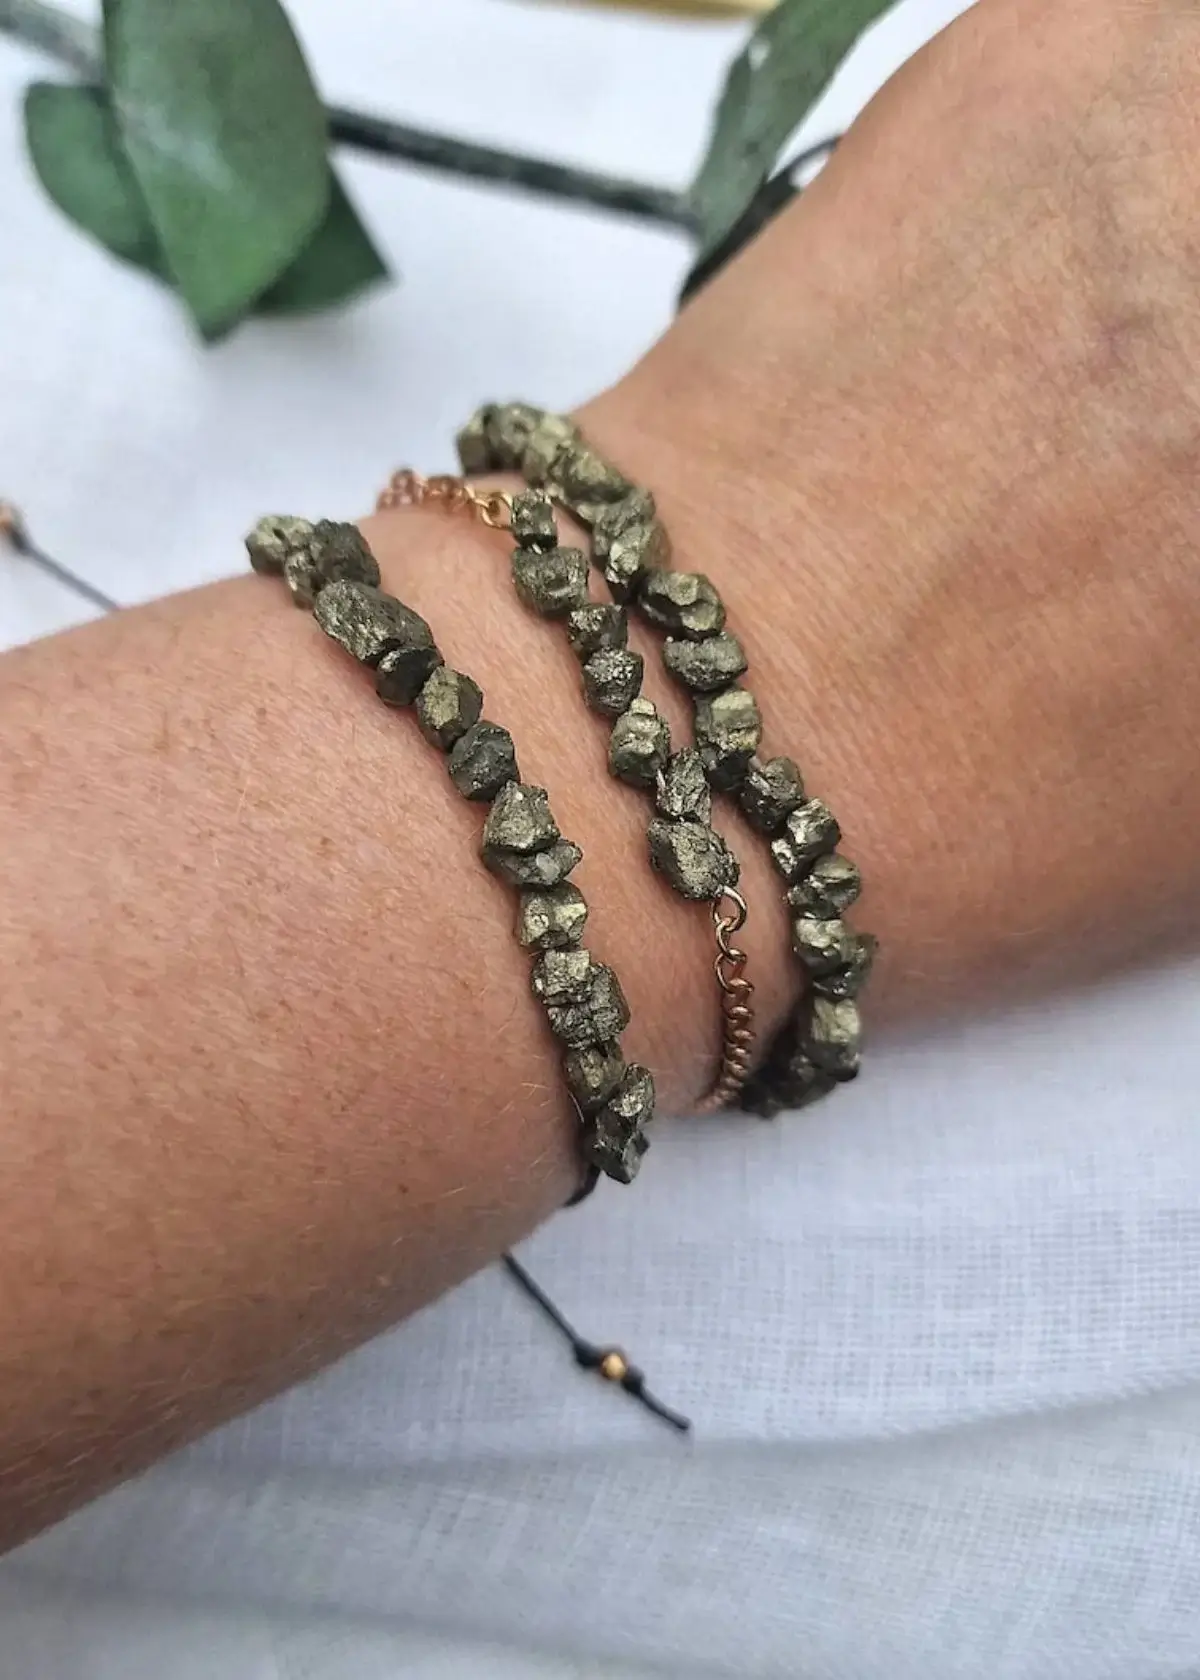 How does a Pyrite bracelet work?